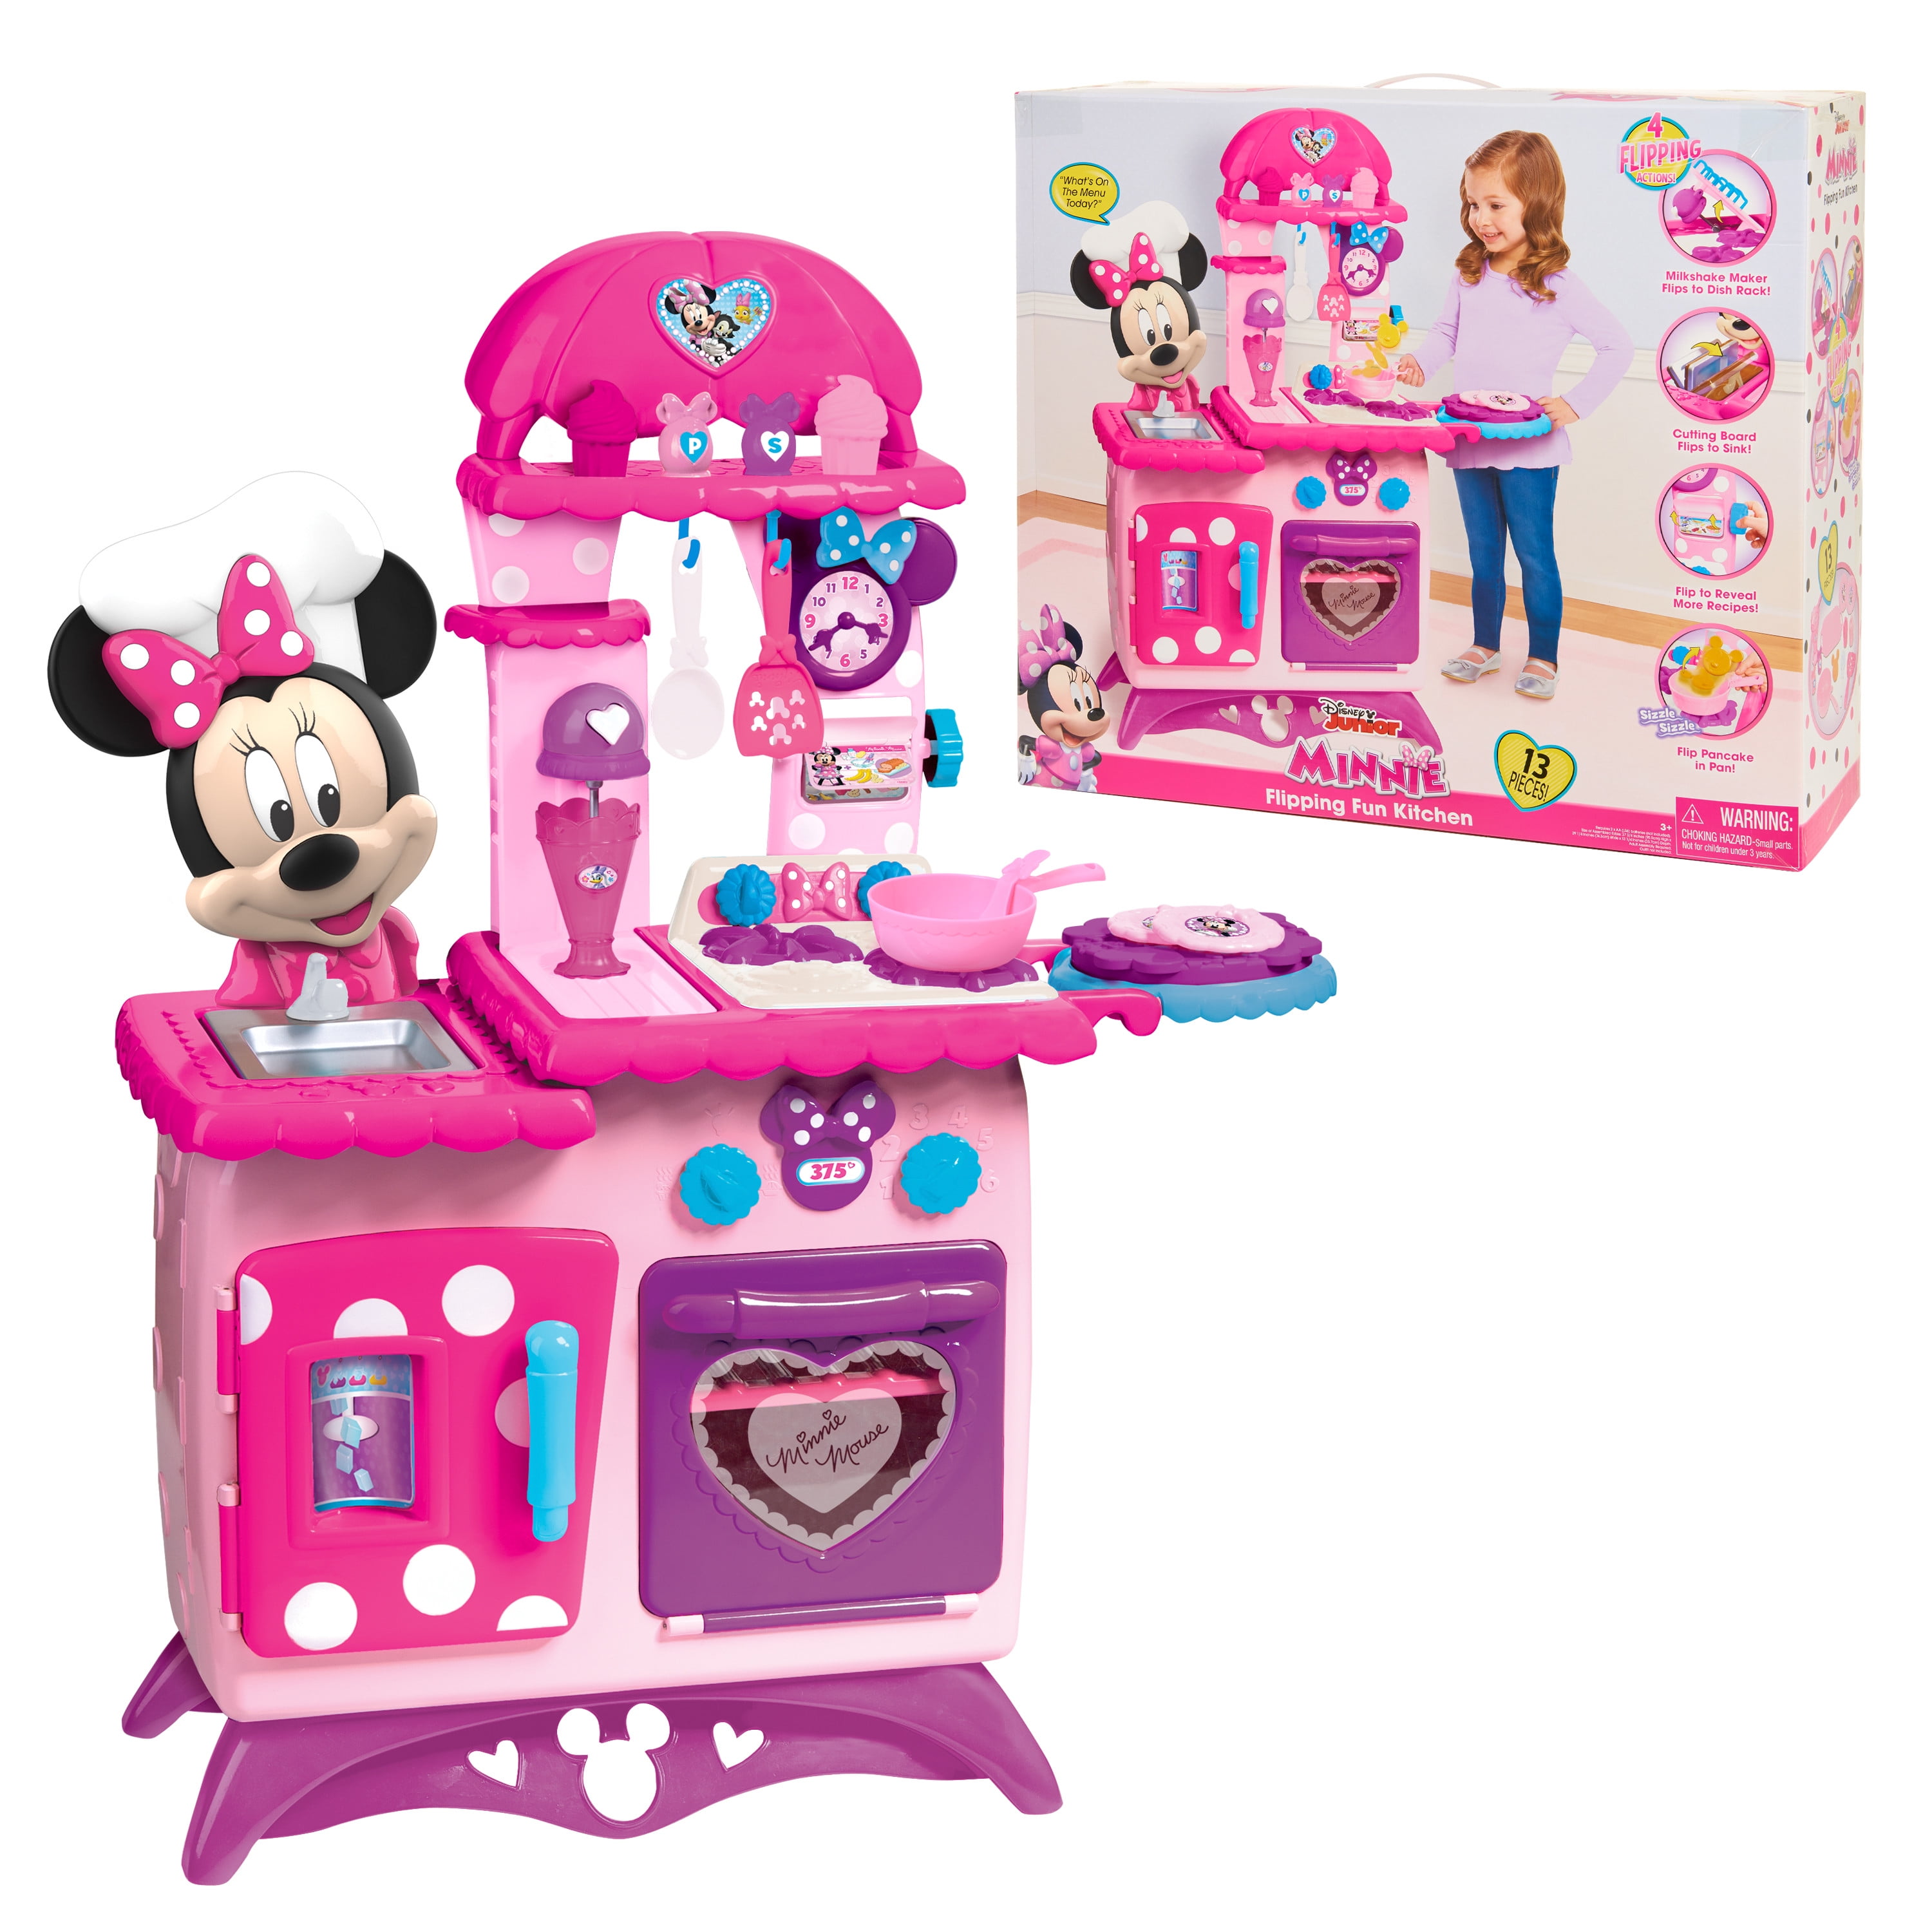 Disney Minnie Mouse Kitchen Play Set for Kids Pink for sale online 